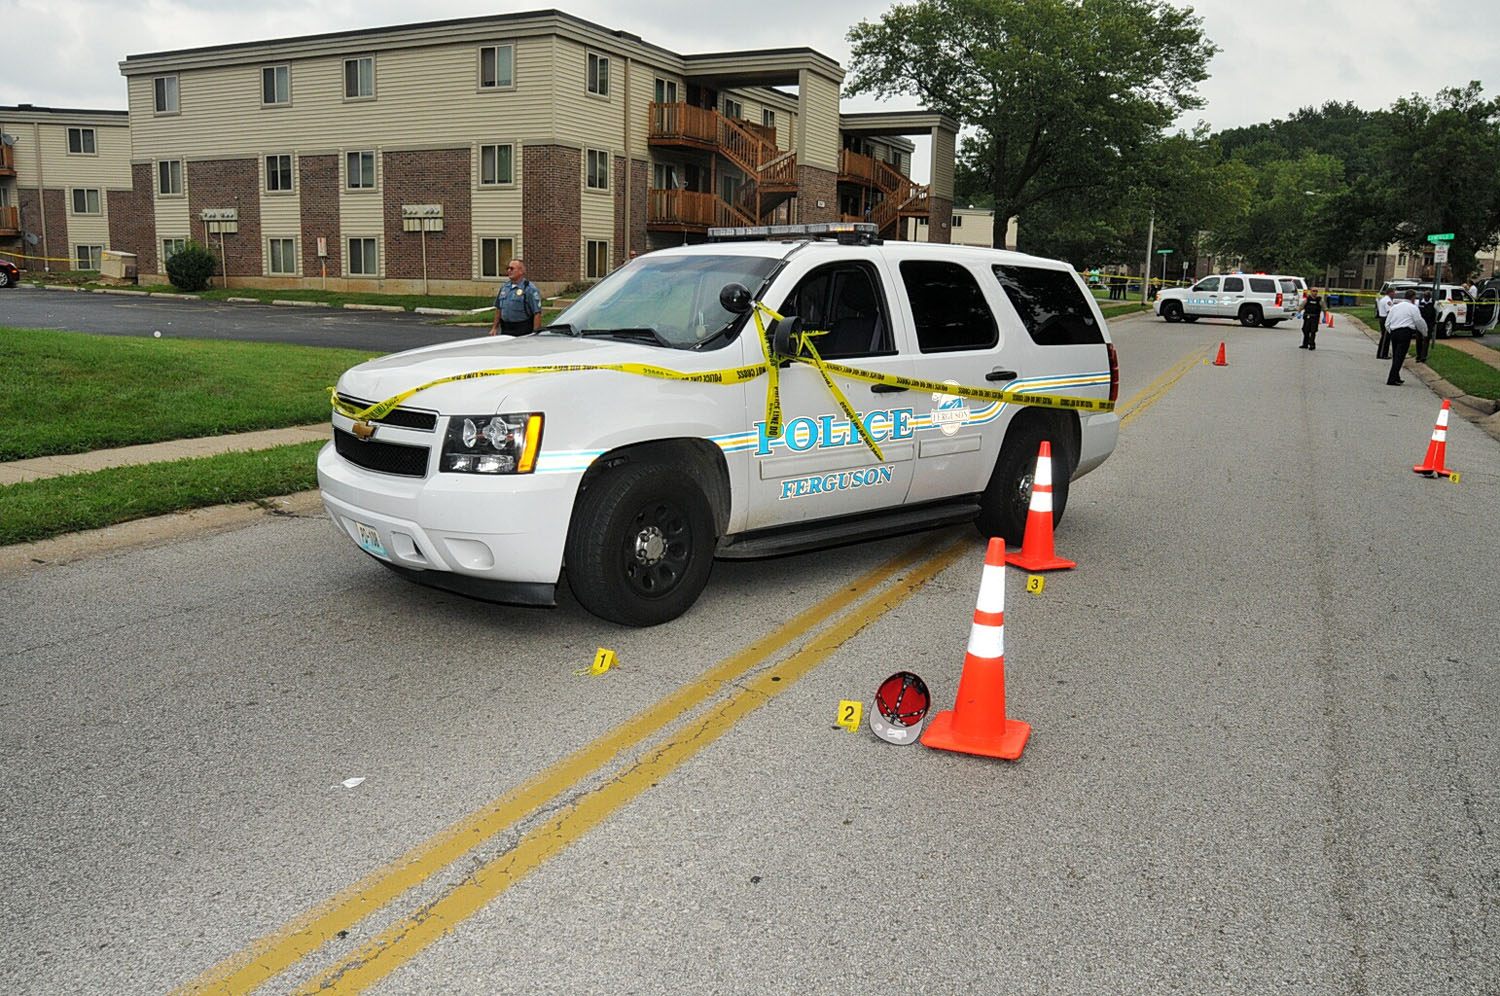 Officer Darren Wilson's vehicle is shown at the scene of the confrontation in this undated evidence photograph made available by the St. Louis County prosecutors office